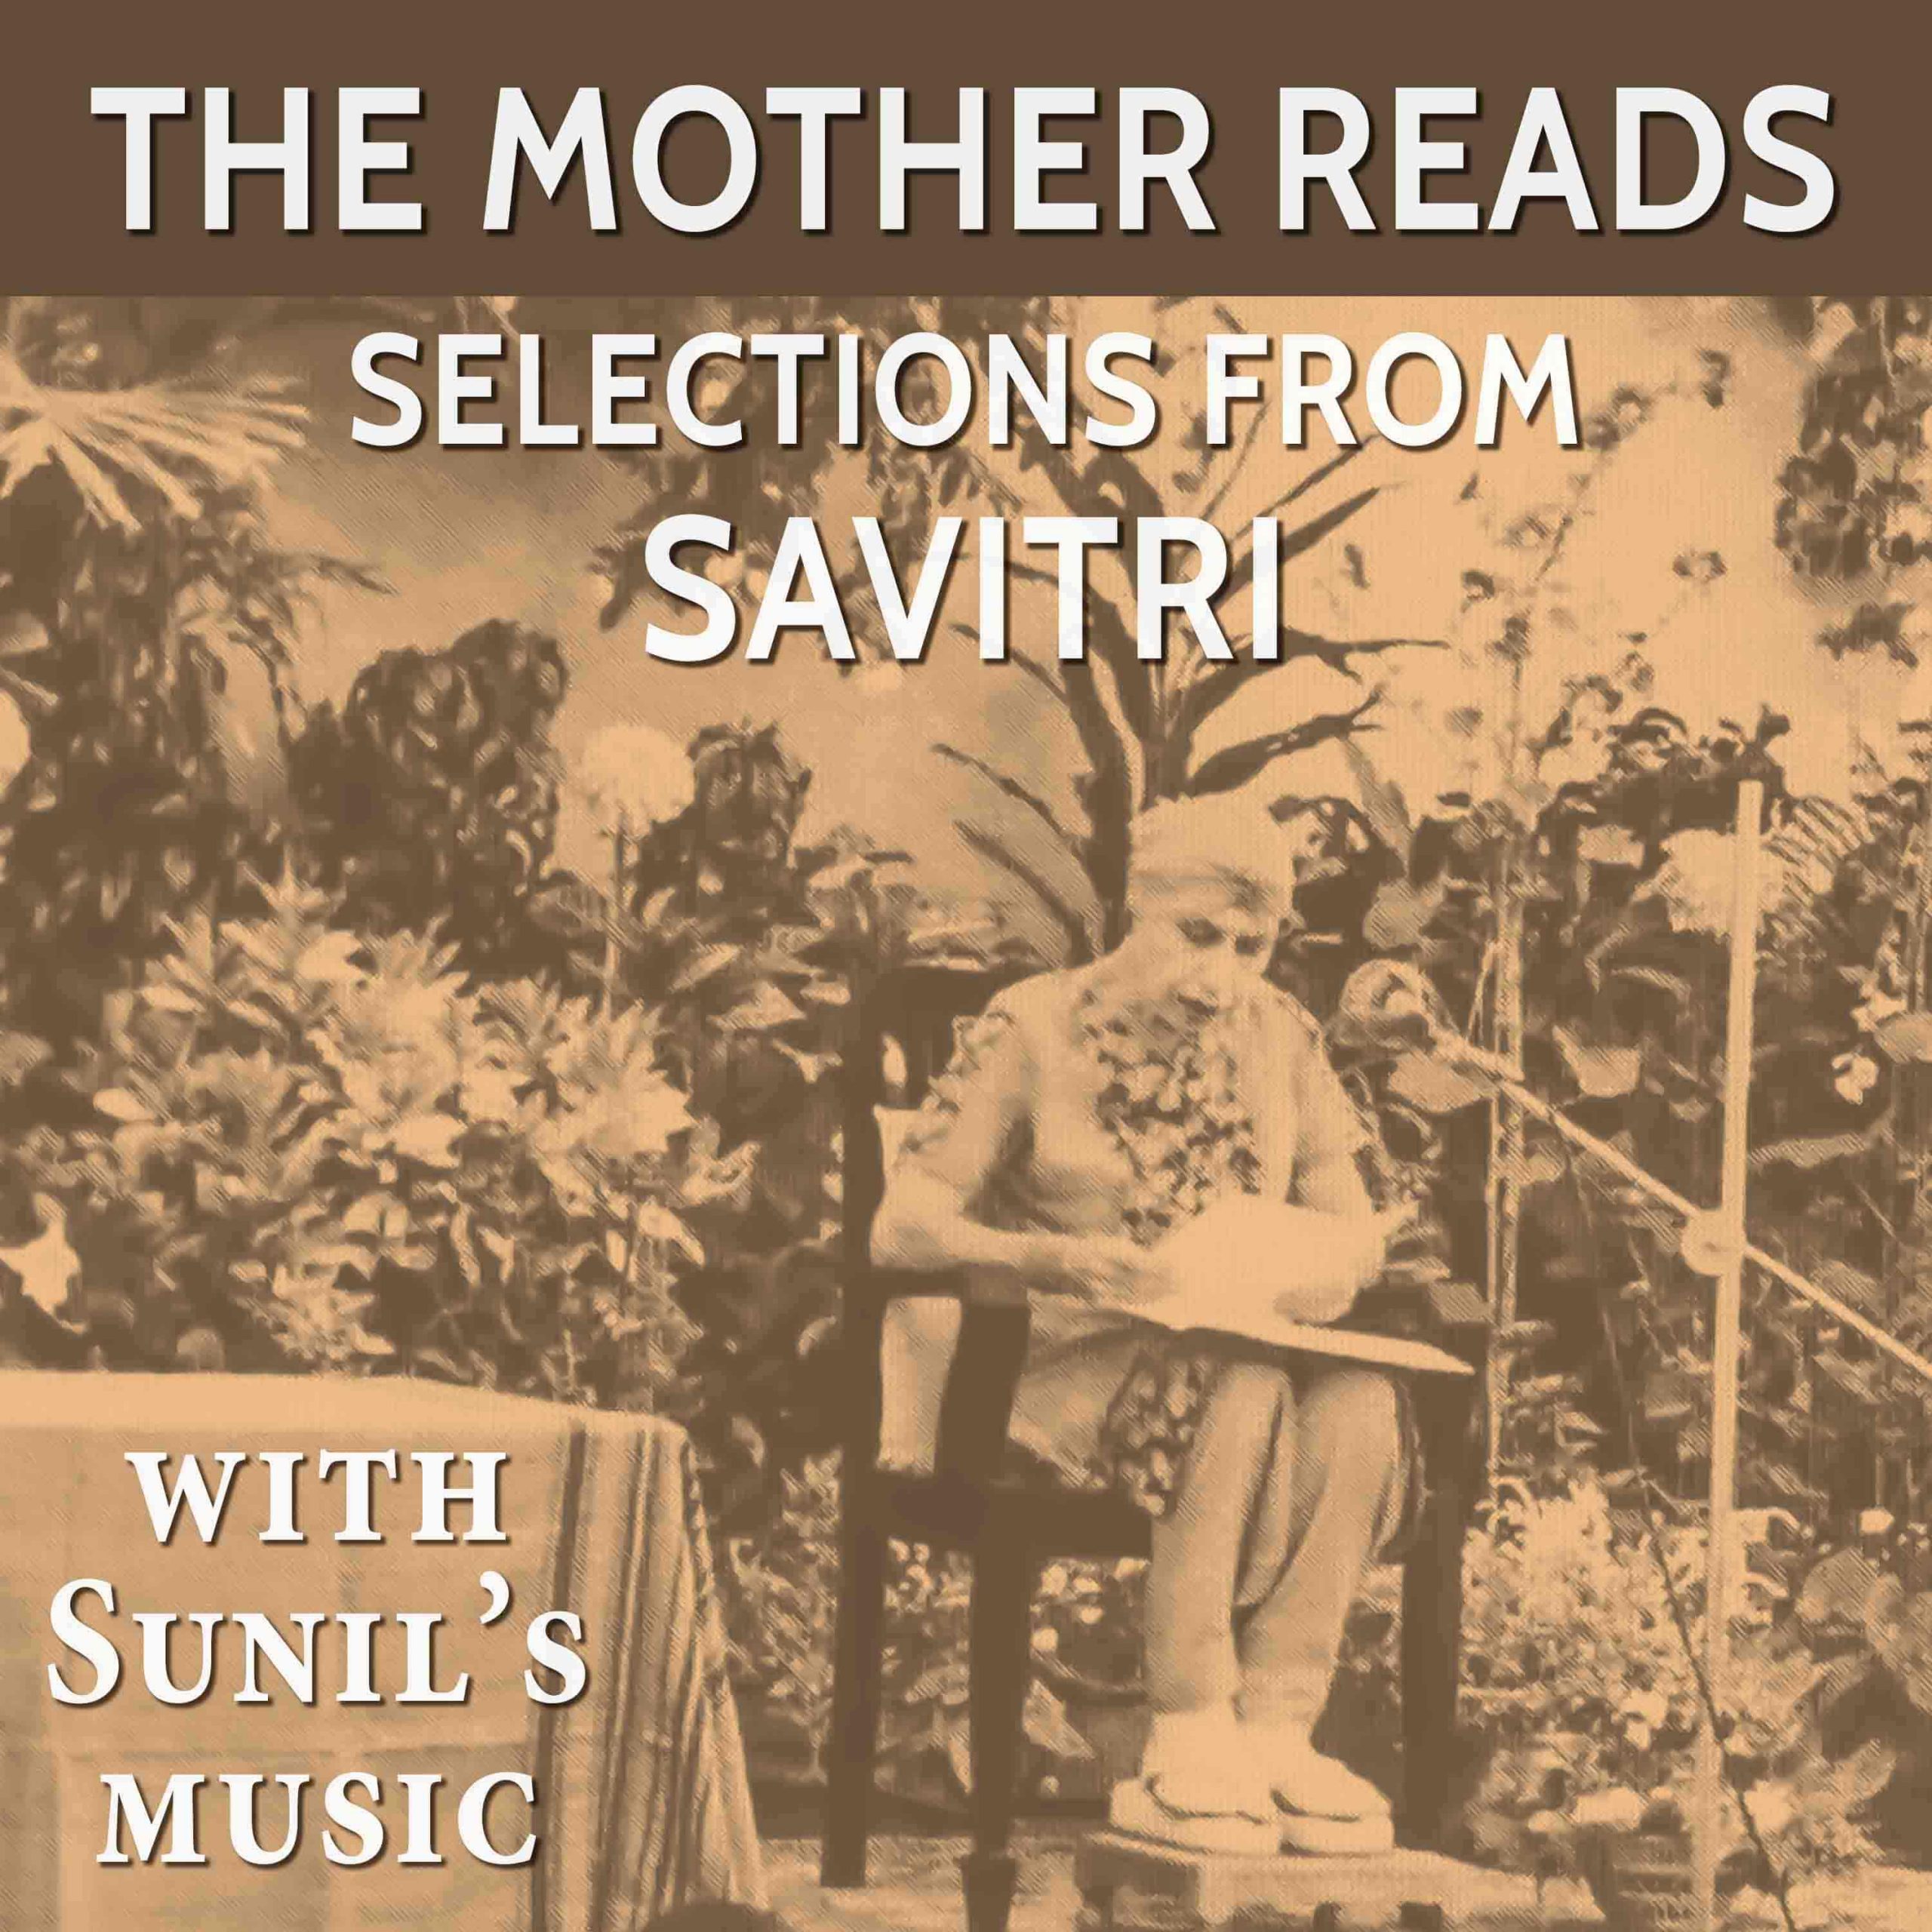 The Mother Reads Savitri Podcast